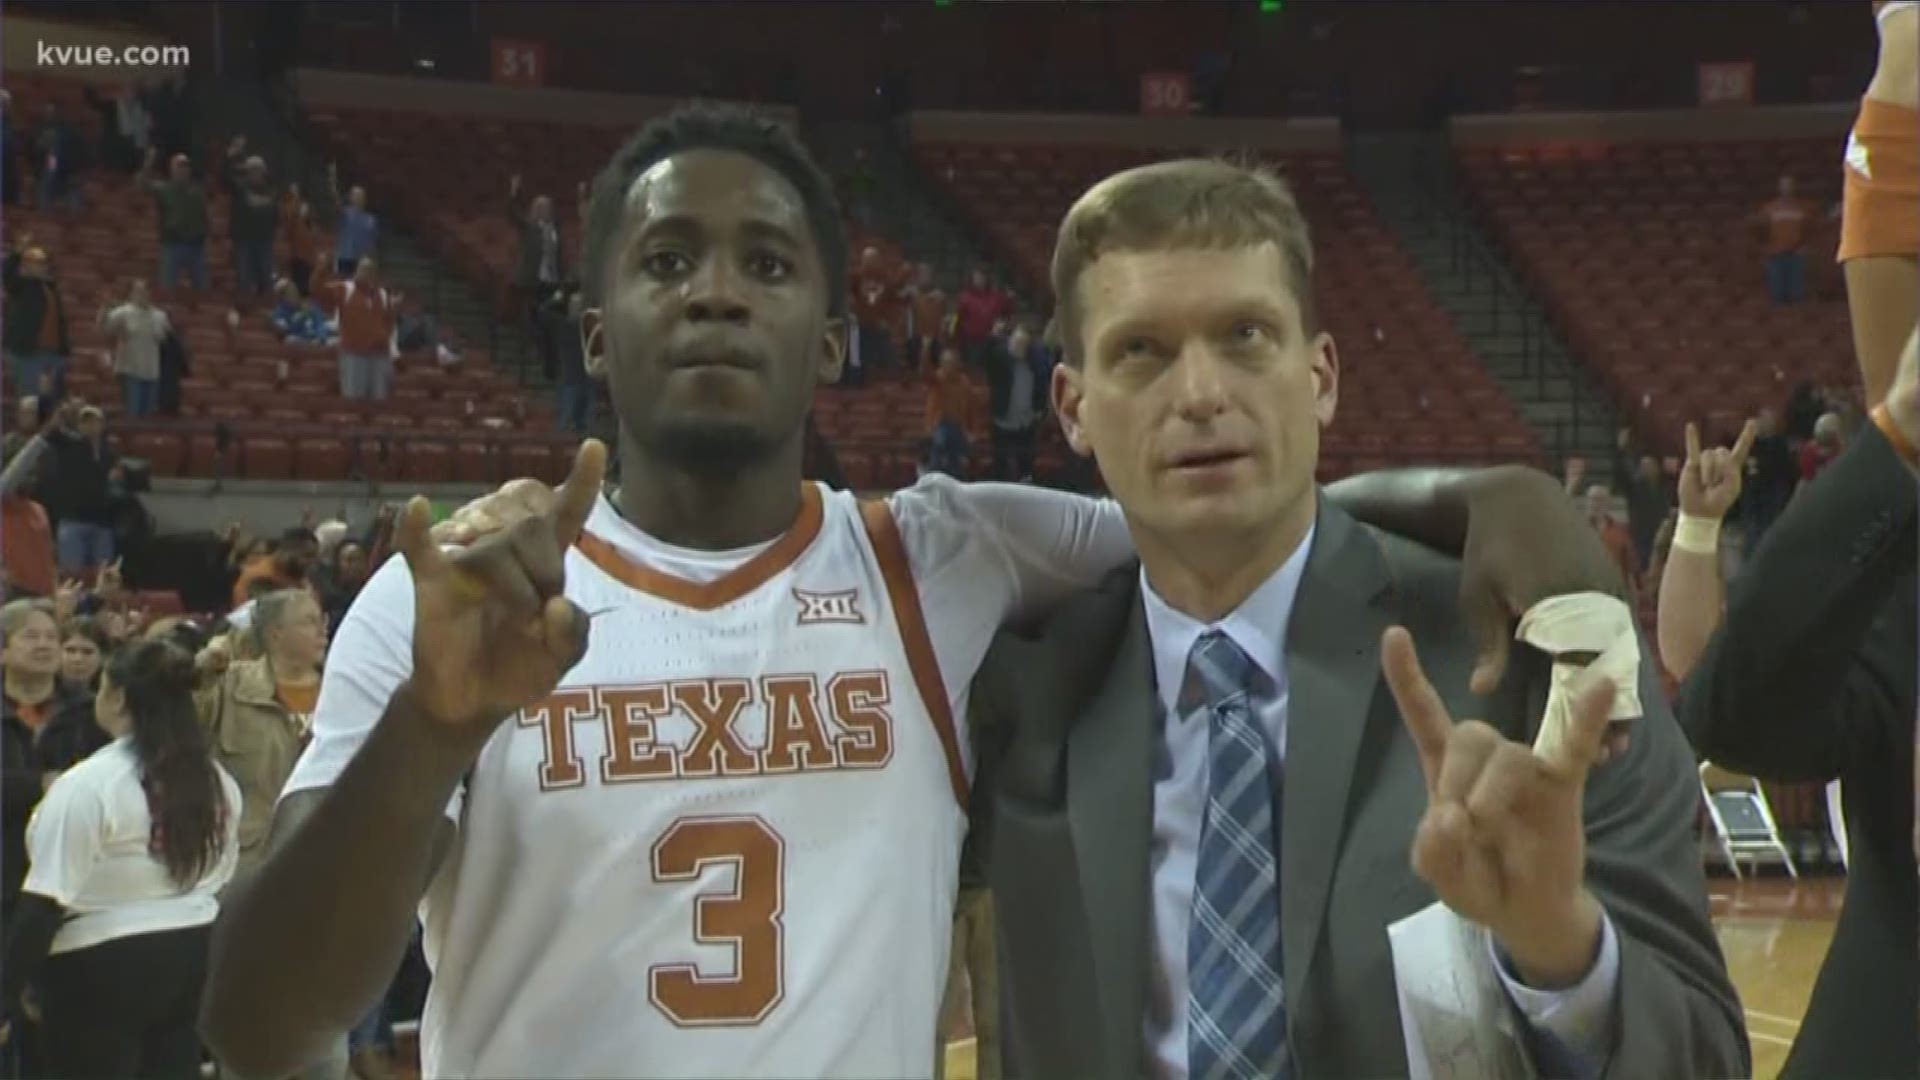 Texas defeated California Baptist, 67-54, moving the Longhorns to 3-0 to start the 2019 season.